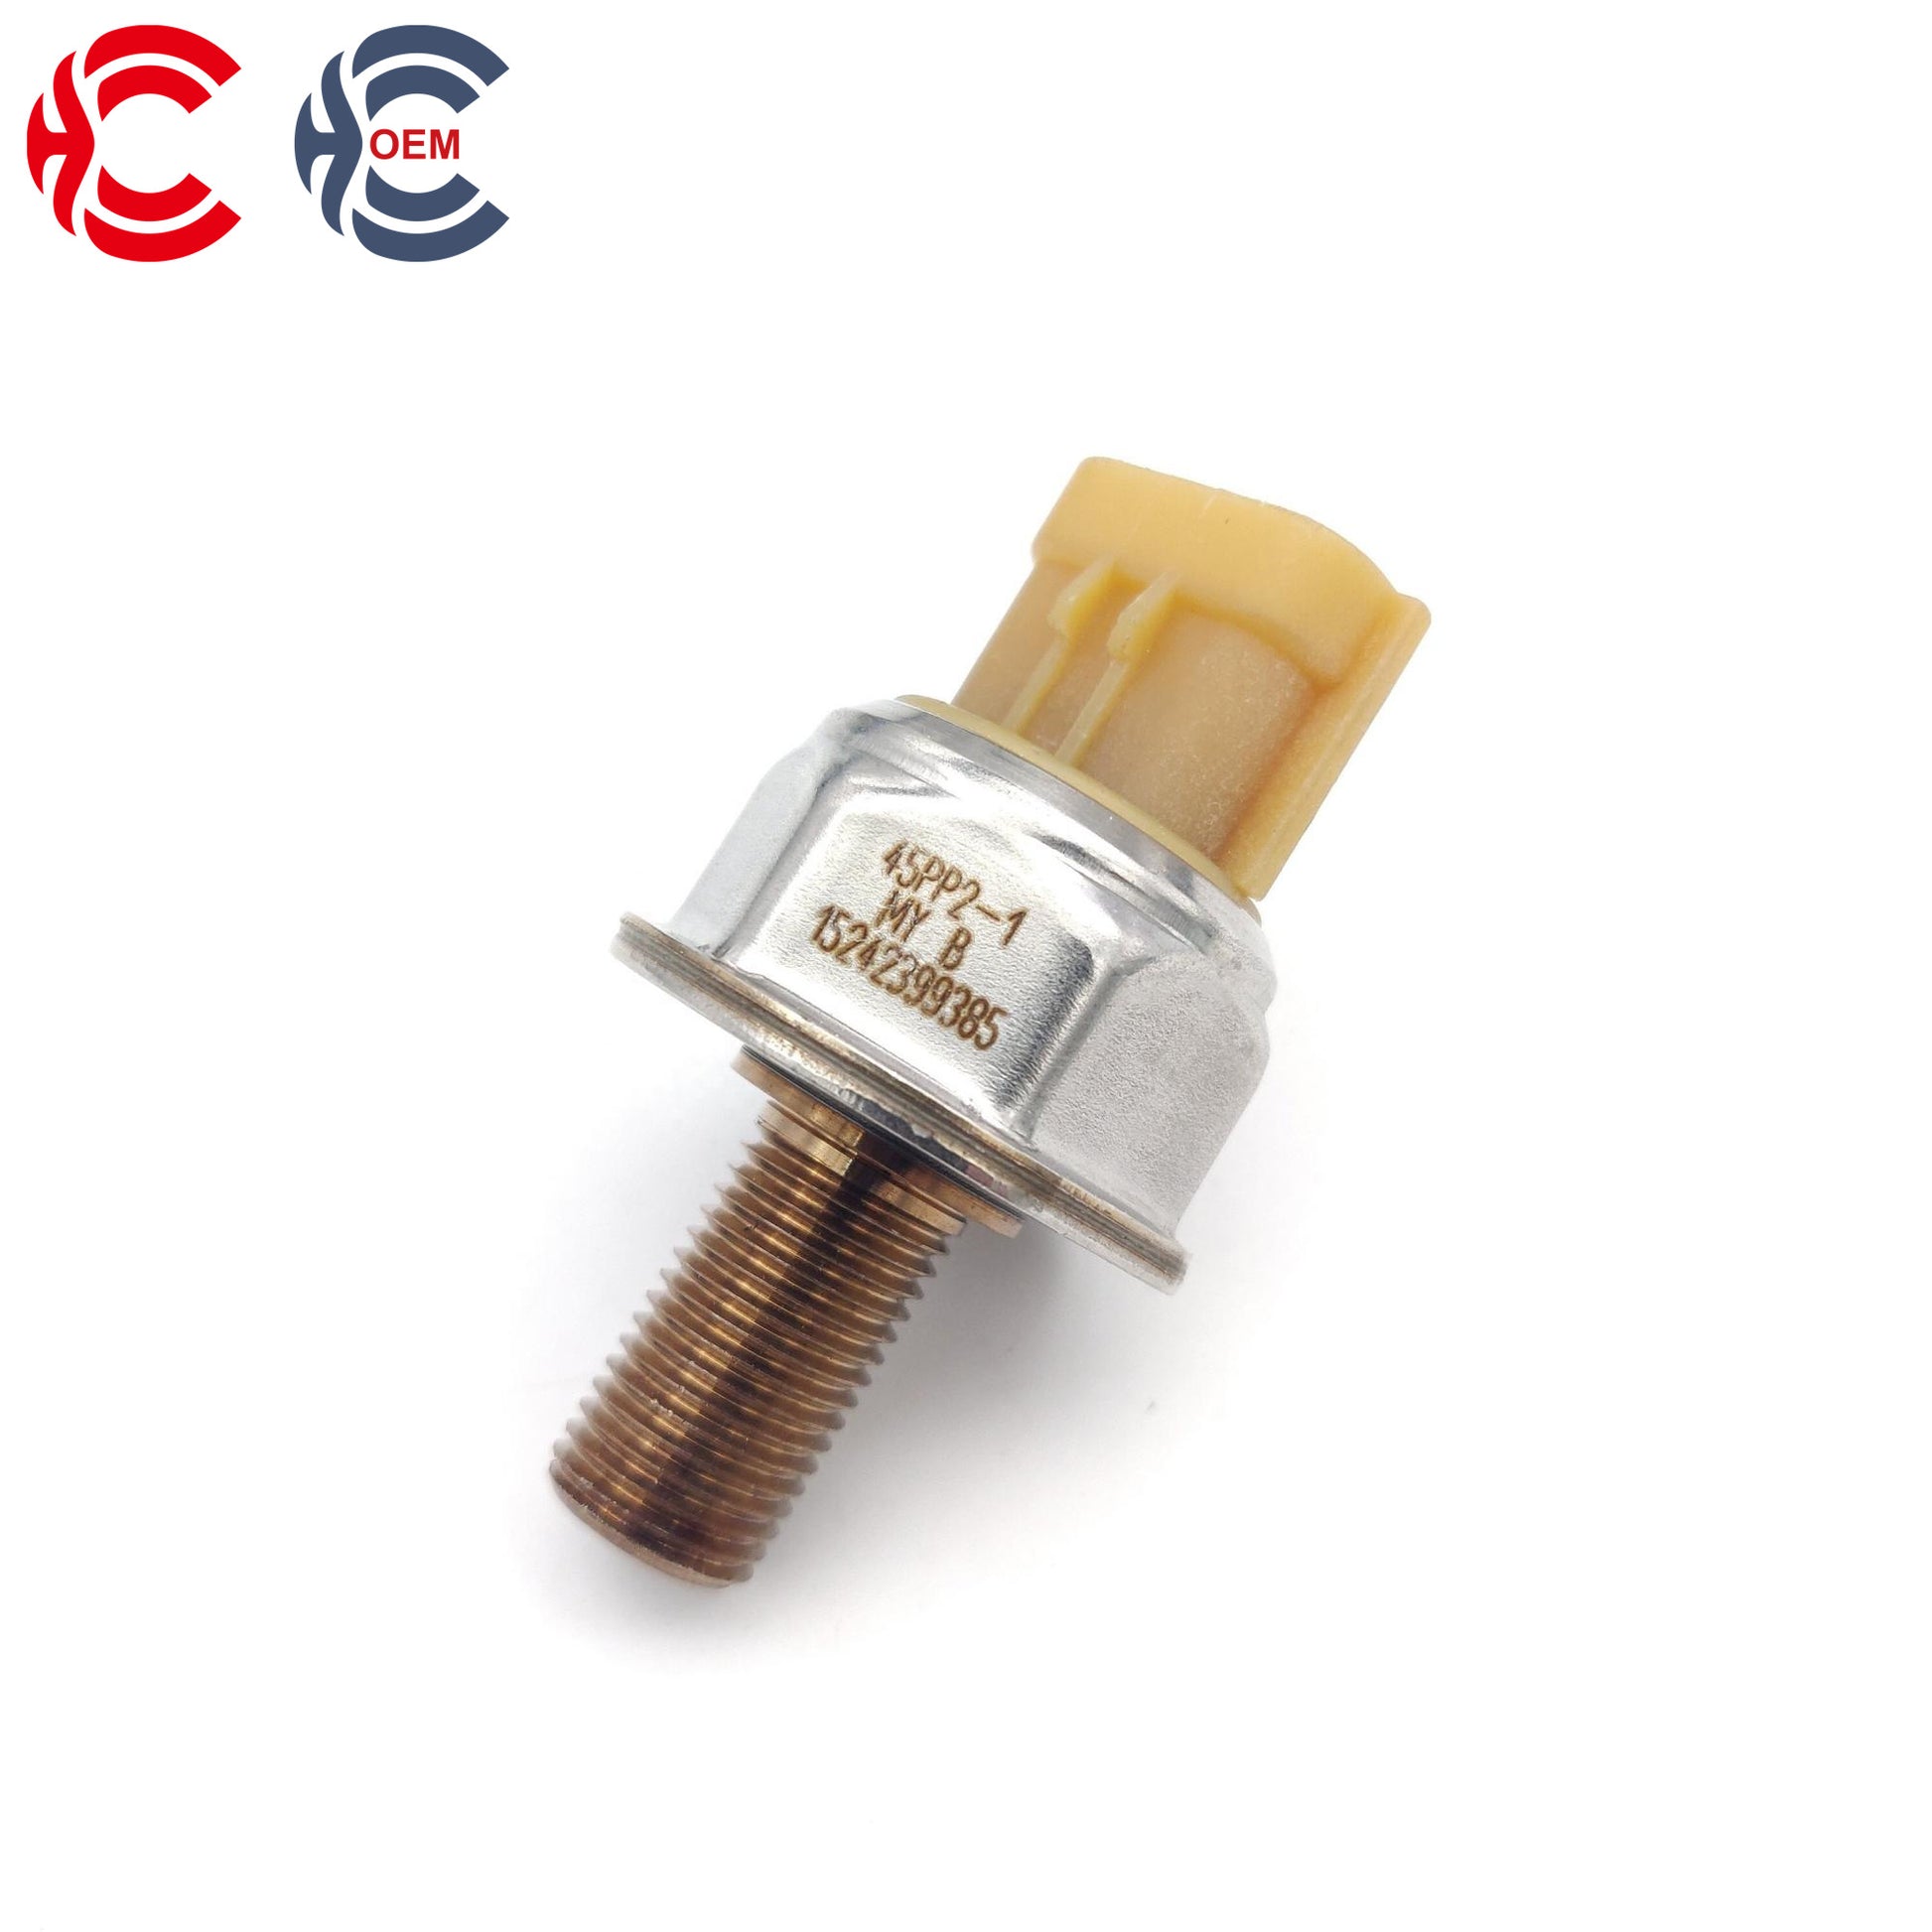 OEM: 45PP2-1Material: ABS metalColor: black silverOrigin: Made in ChinaWeight: 100gPacking List: 1* Fuel Pressure Sensor More ServiceWe can provide OEM Manufacturing serviceWe can Be your one-step solution for Auto PartsWe can provide technical scheme for you Feel Free to Contact Us, We will get back to you as soon as possible.